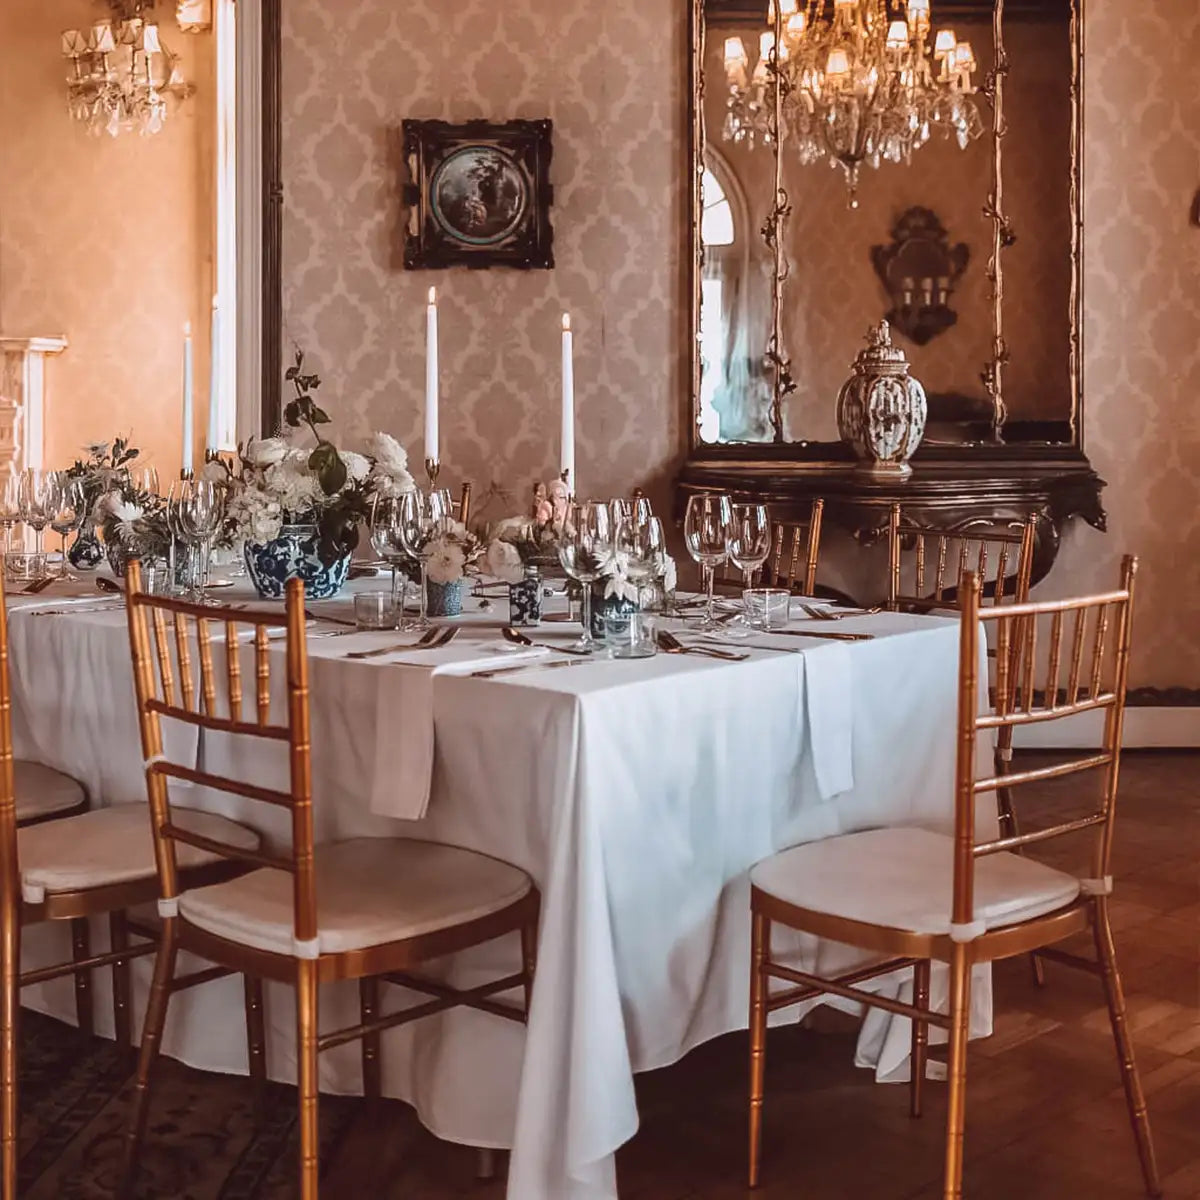 Luxurious event dining room with a round table adorned with white linens, gold chairs, tall candles, and elegant floral arrangements, set against a backdrop of ornate decor and chandeliers. Fabulous Flowers and Gifts.